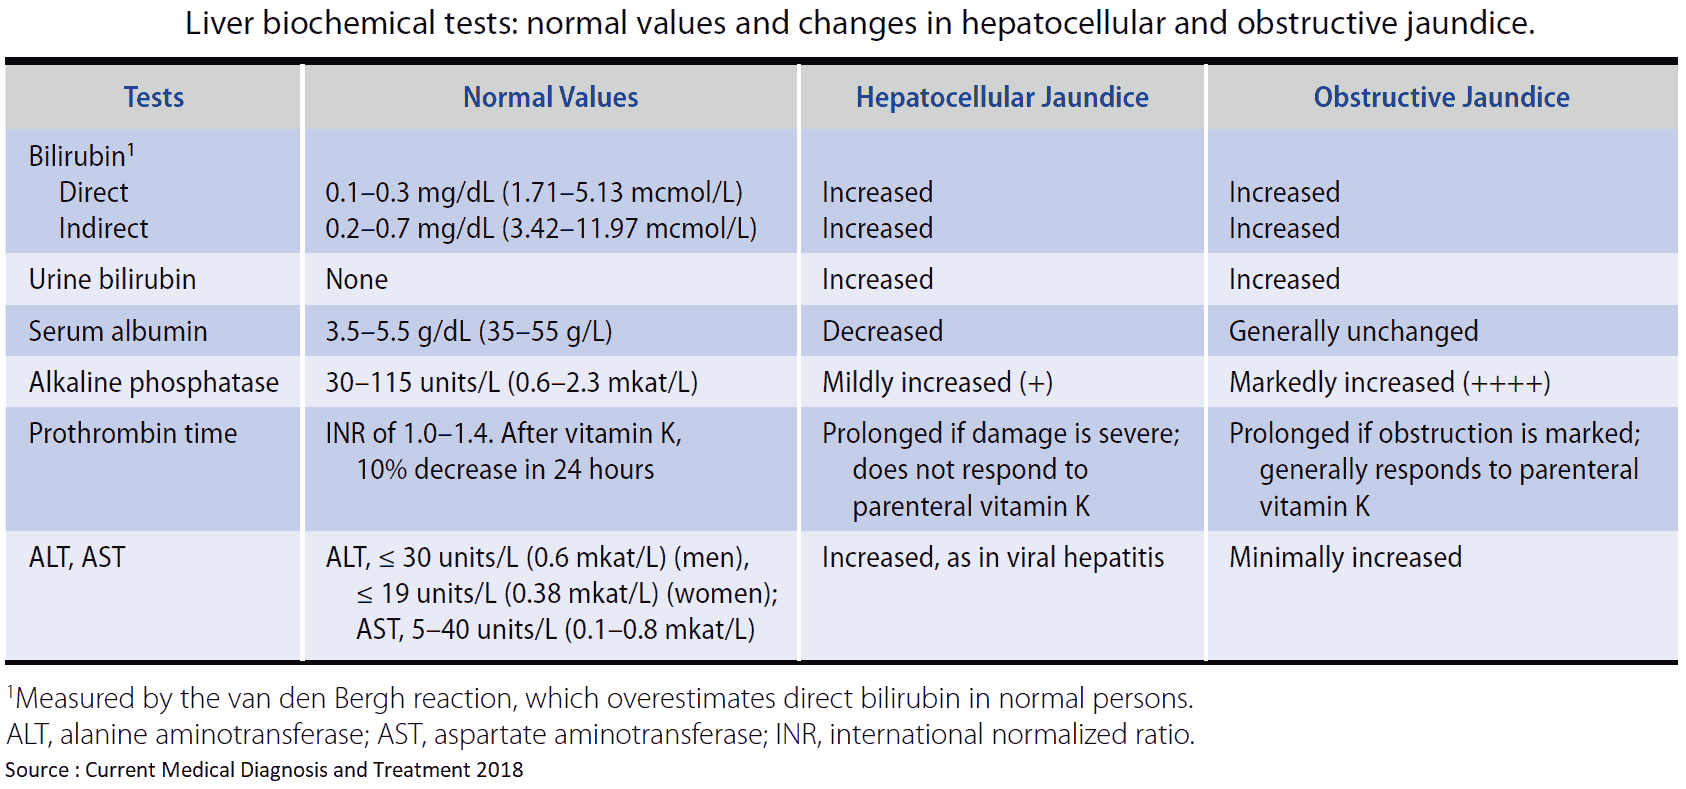 Liver biochemical tests - normal values and changes in hepatocellular and obstructive jaundice